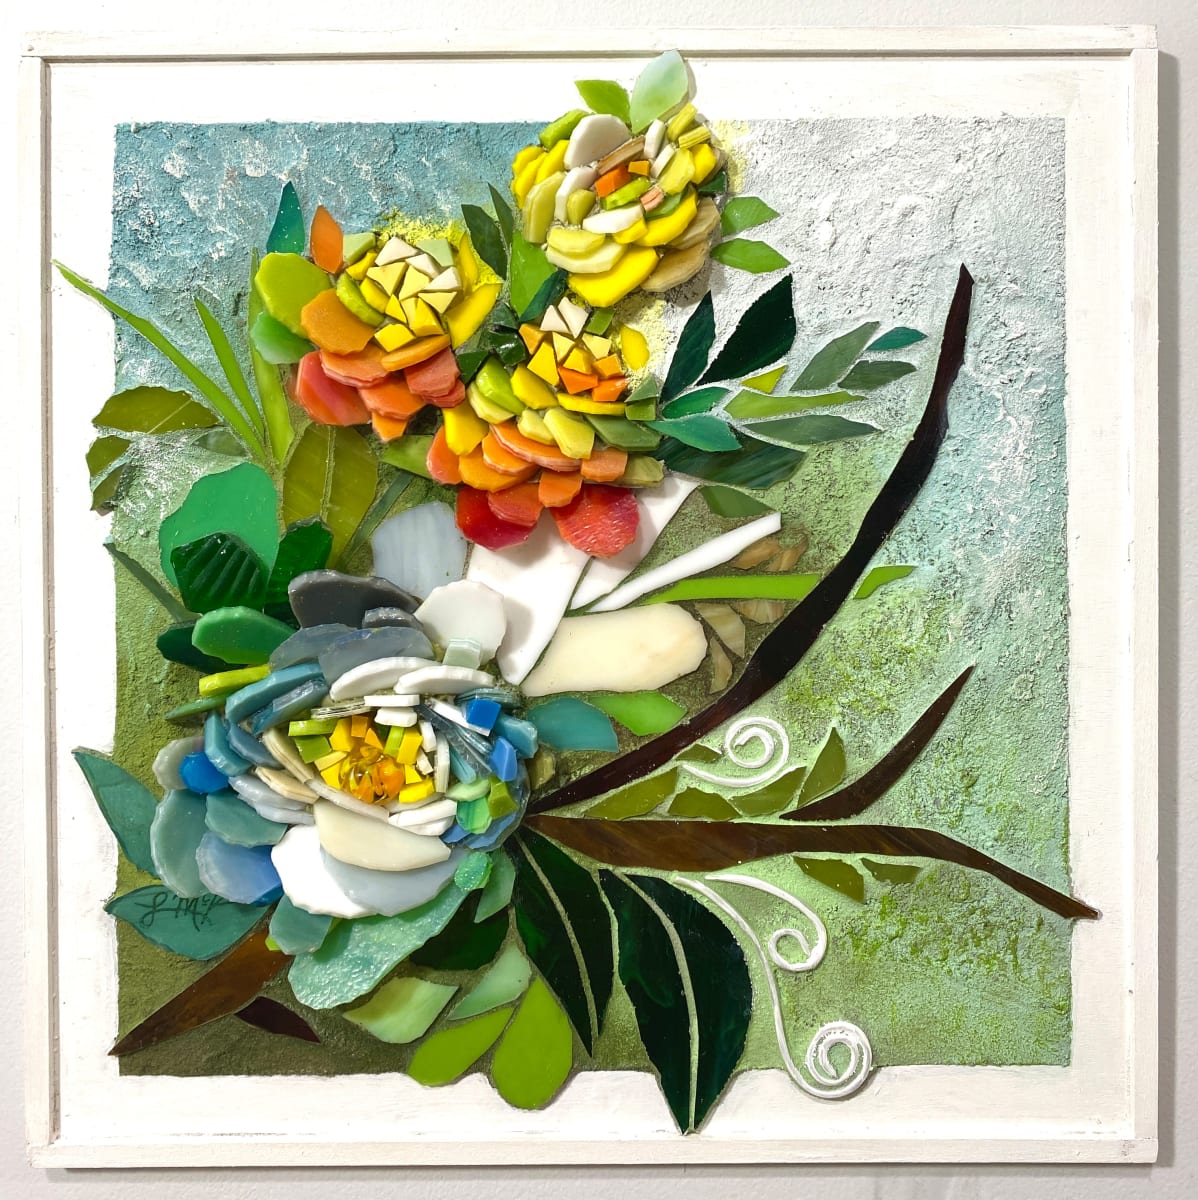 Buoyant  Image: Abstract floral blossoms with raised petals in stained glass and painted grout